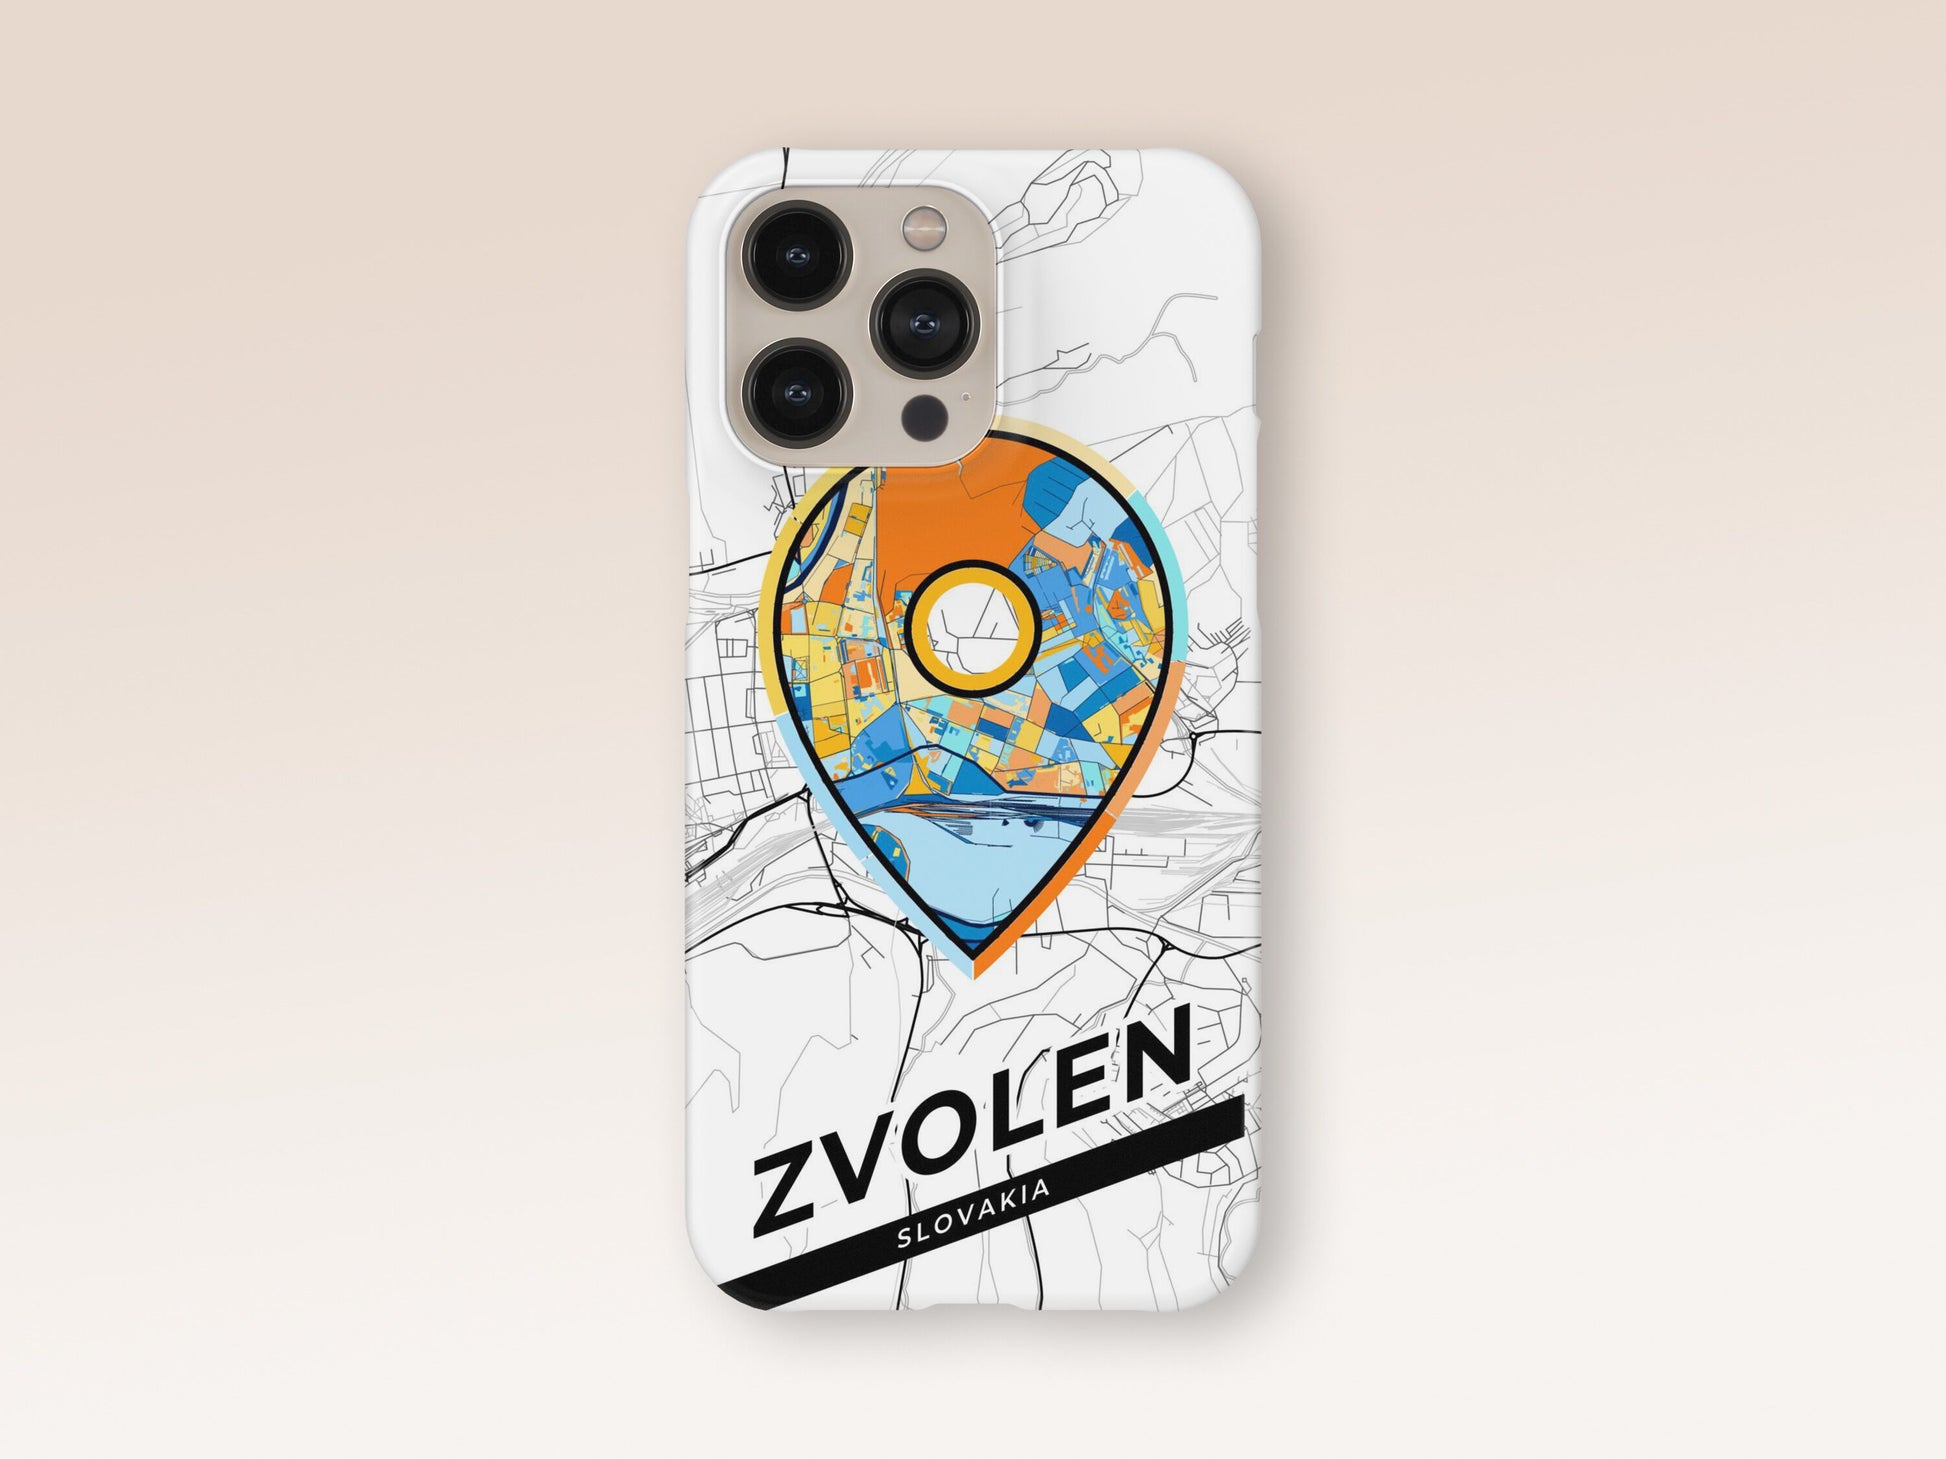 Zvolen Slovakia slim phone case with colorful icon. Birthday, wedding or housewarming gift. Couple match cases. 1